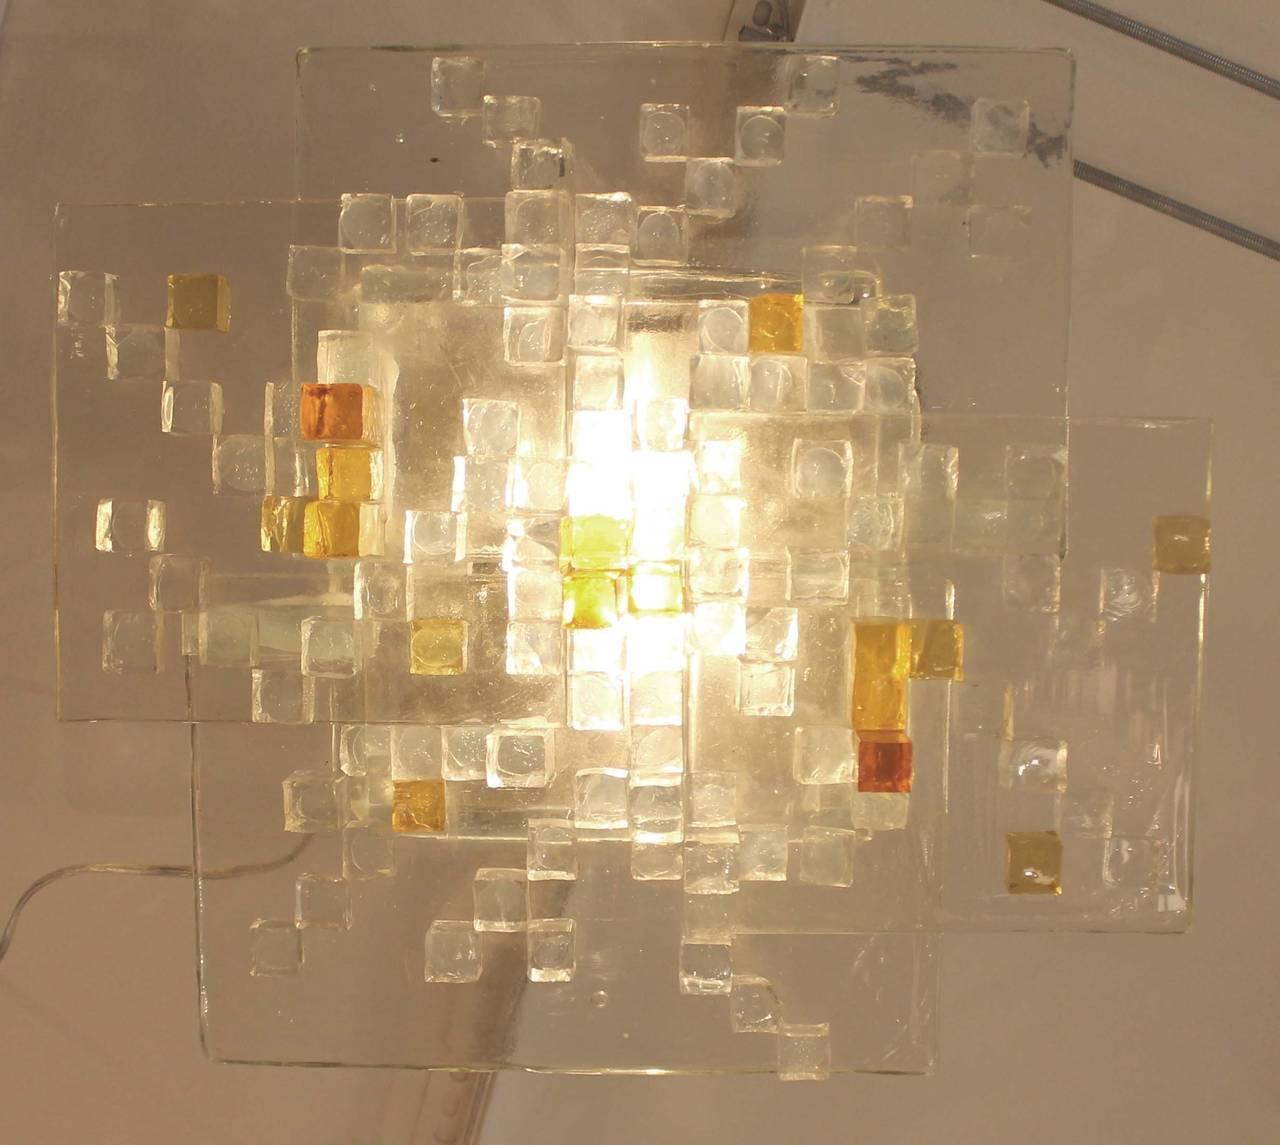 Ceiling light composed of four thick glass slabs with protruding "broken" clear and amber glass cubes. This is a typical example of the creativity of Poli, the creator of Poliarte, who often employed the technique of gluing together